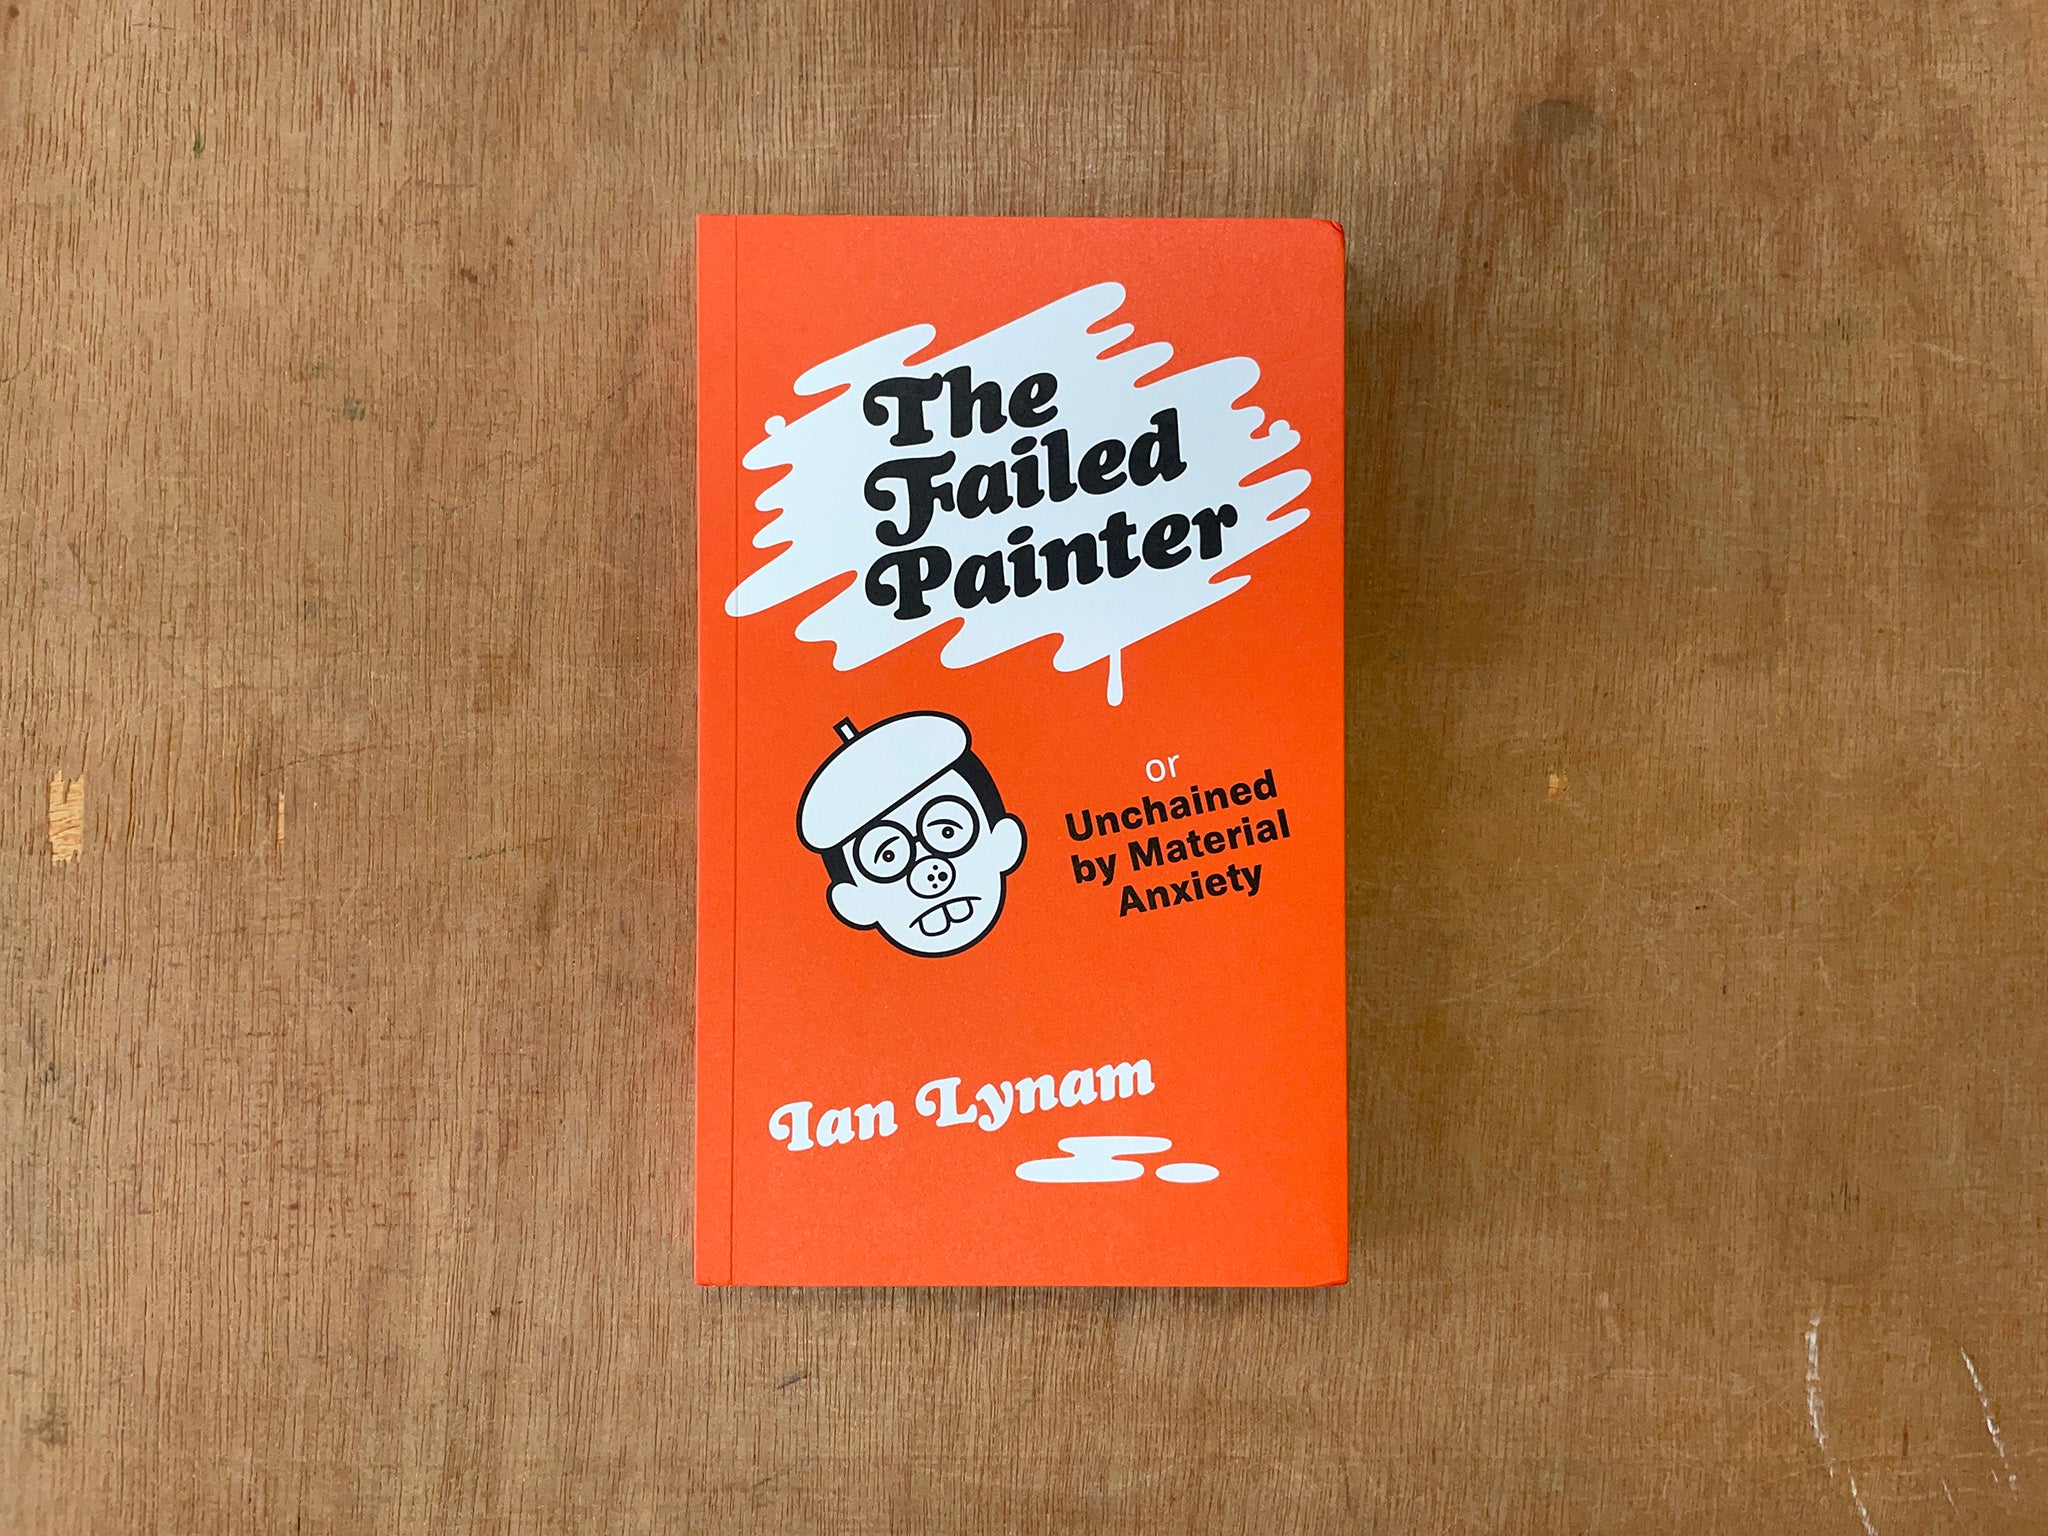 THE FAILED PAINTER, OR: UNCHAINED BY MATERIAL ANXIETY by Ian Lynam